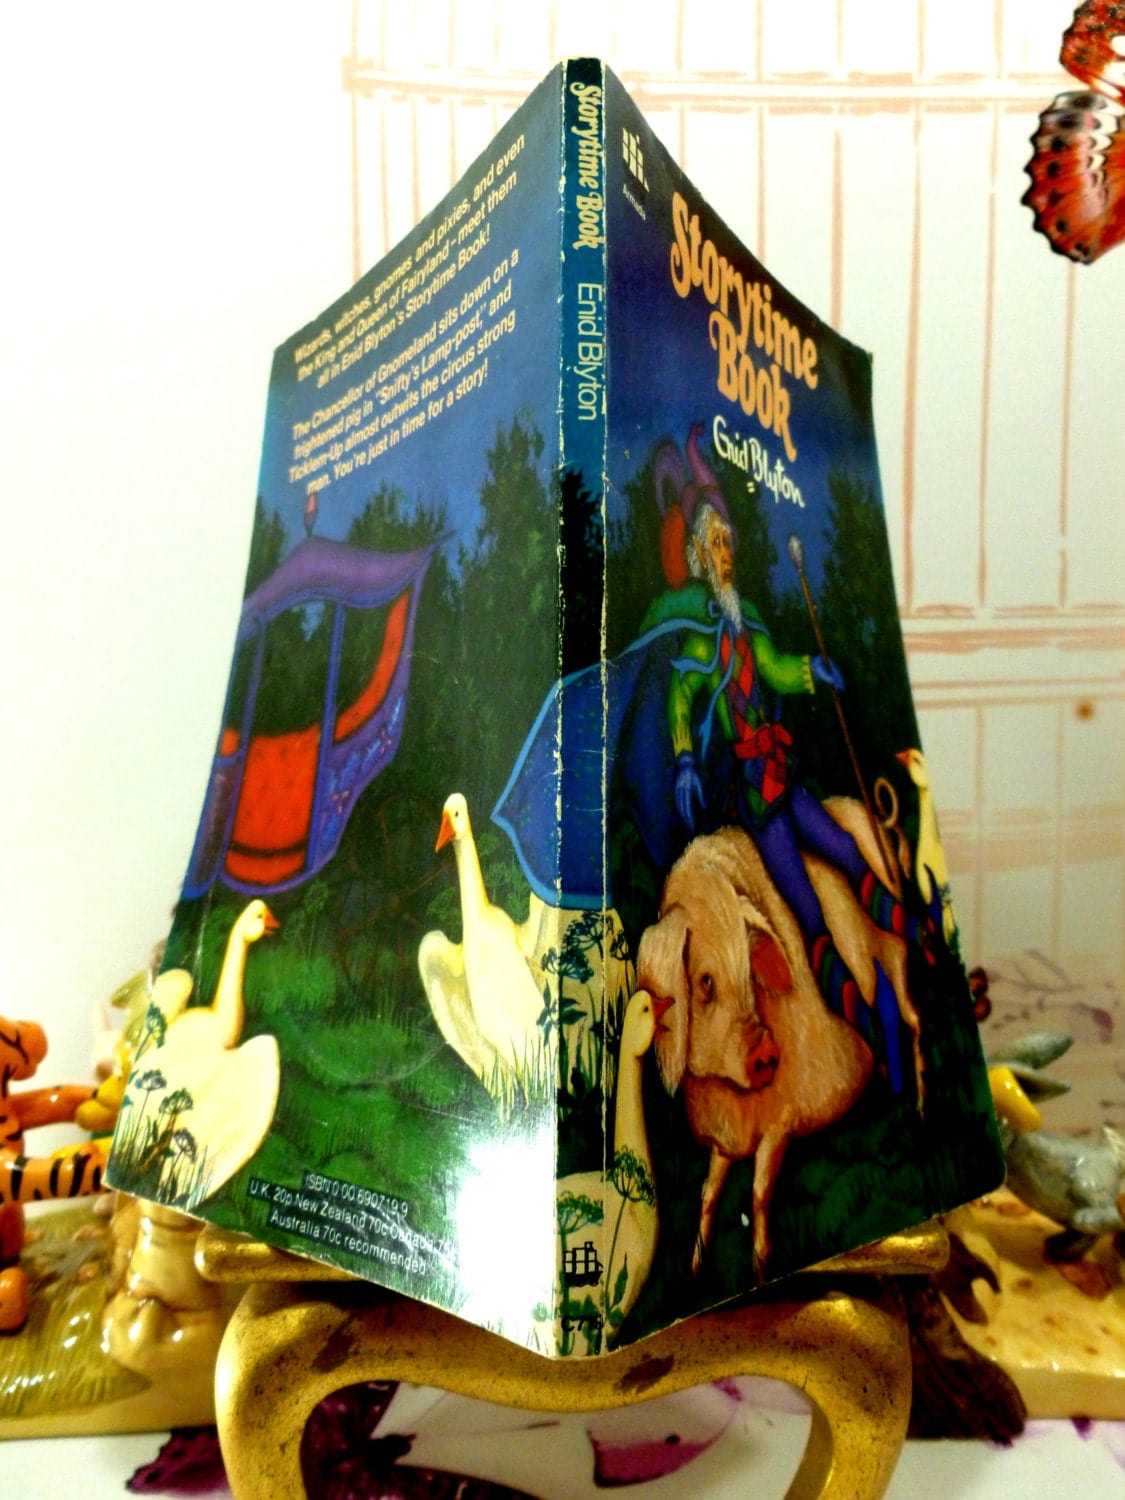 Back and front cover of Enid Blyton Storytime Book Vintage Paperback Armada 1970s showing white geese looking at a fairytale carriage and a gnome riding a pig. 